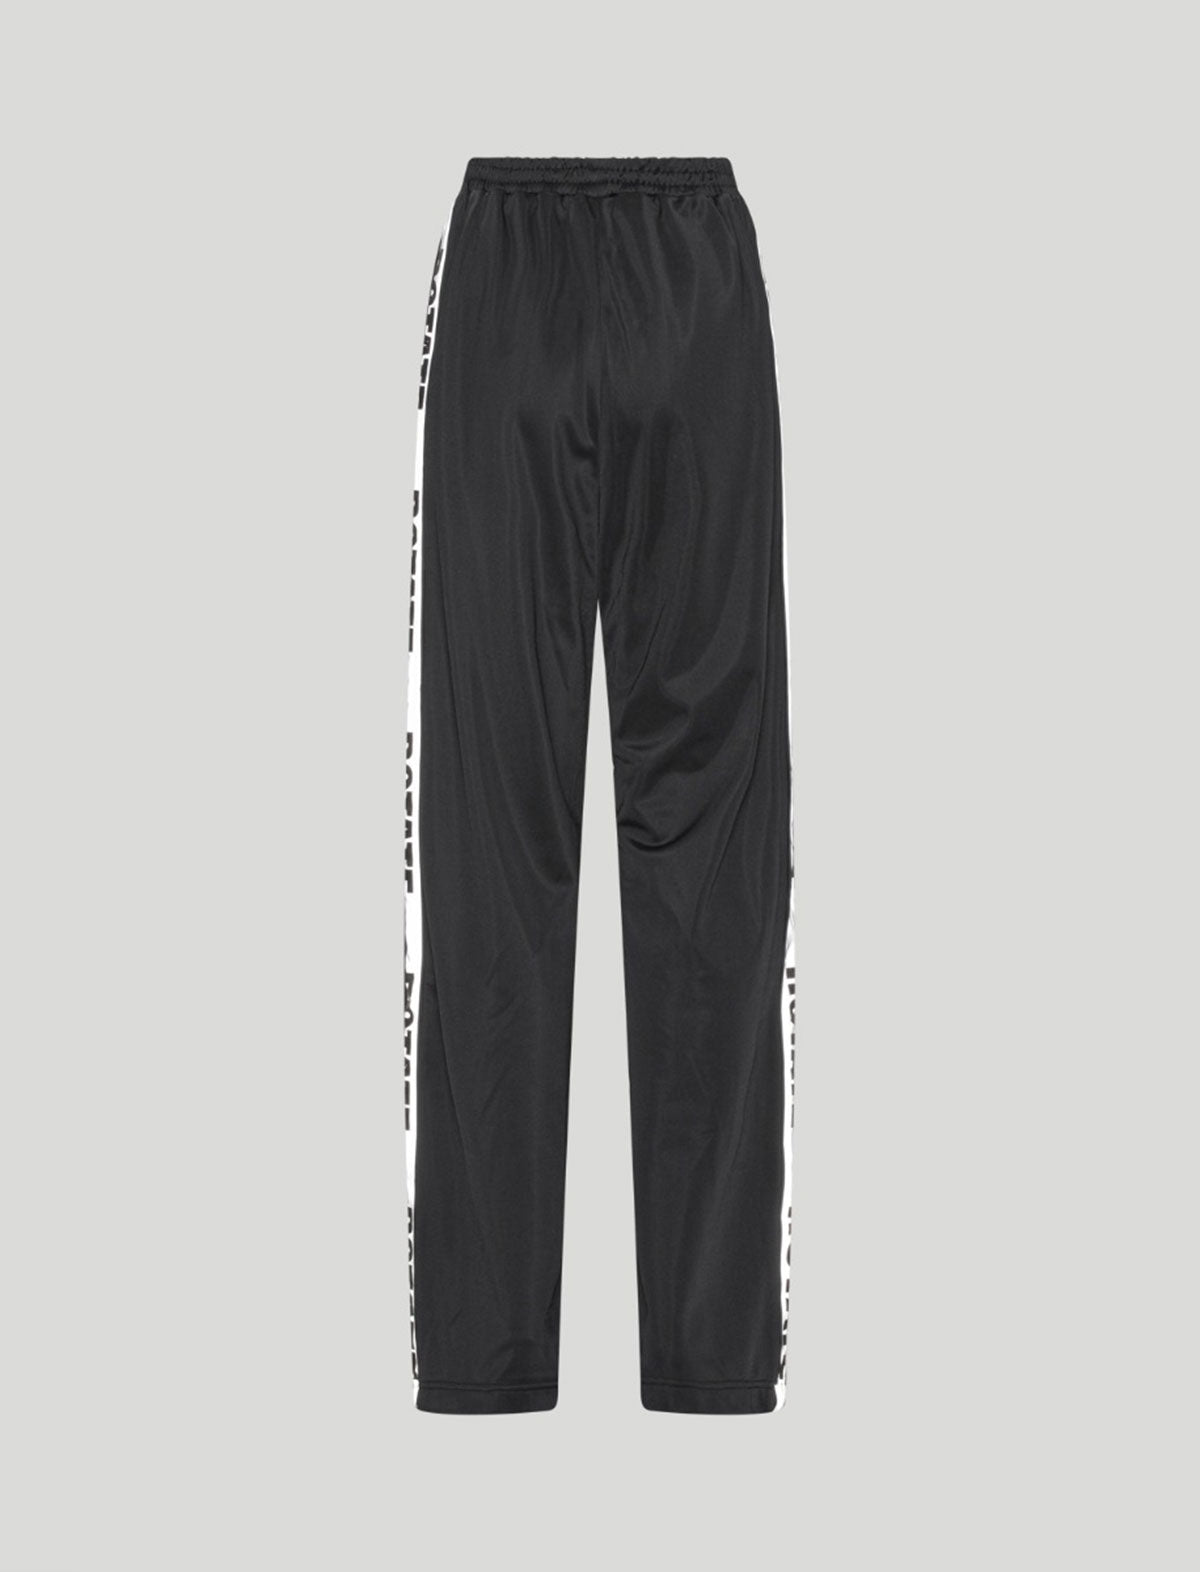 ROTATE SUNDAY 6 Long Stretch Track Pants in Black